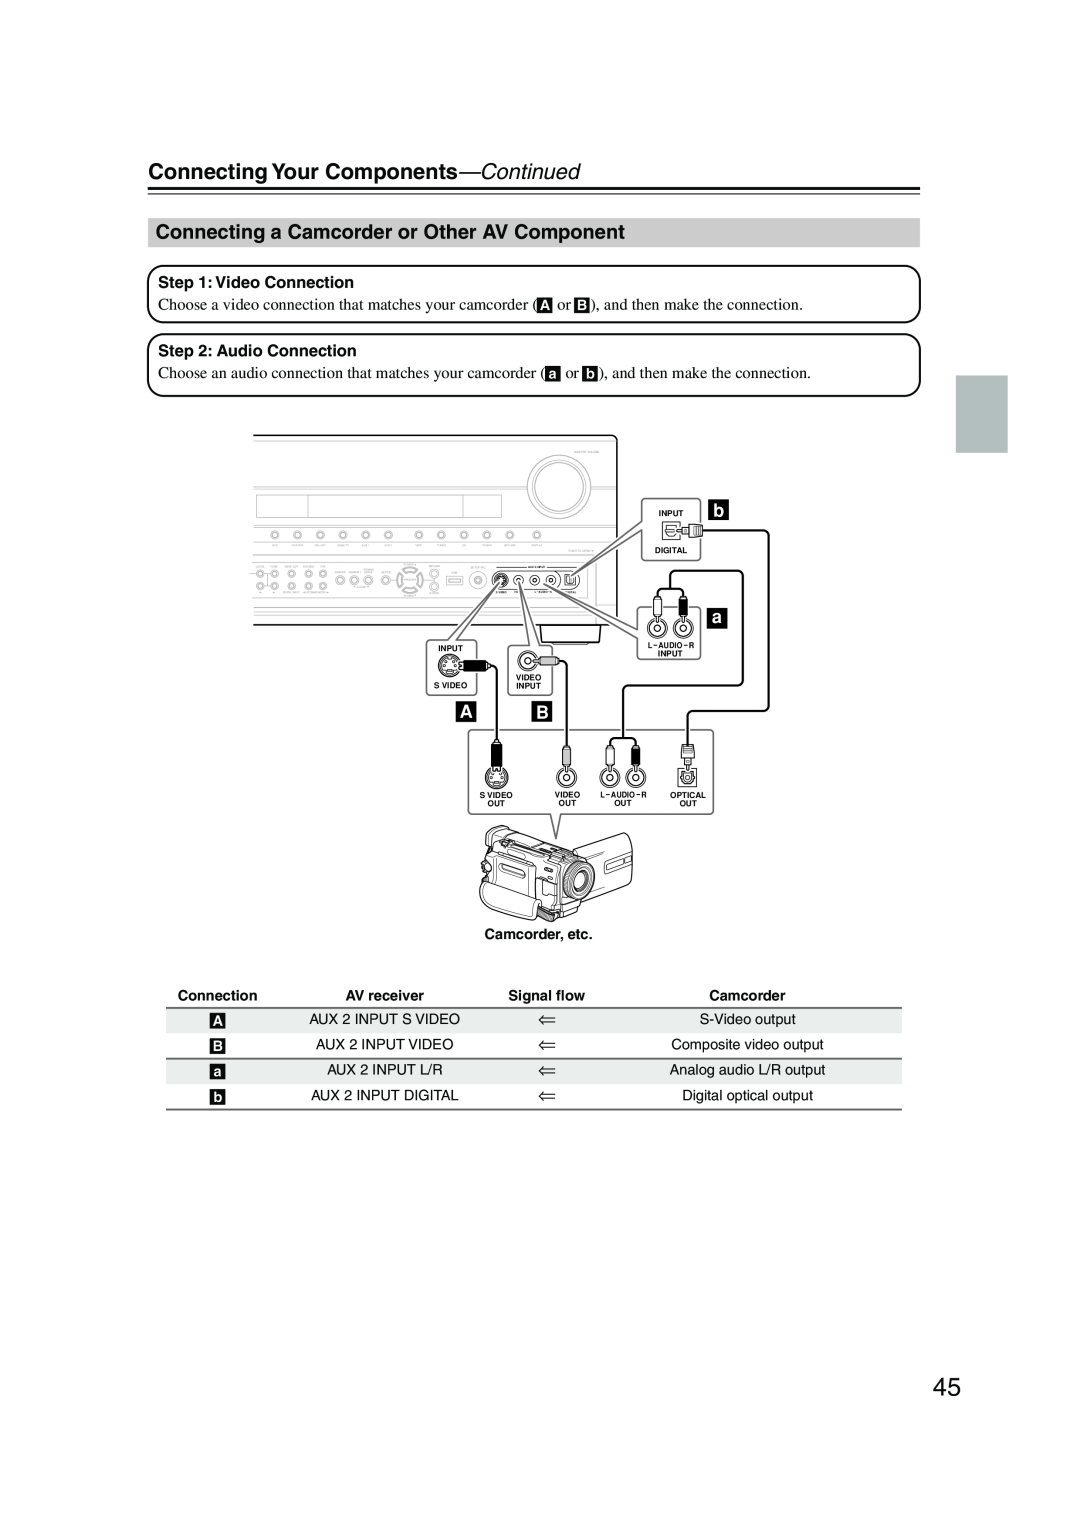 Onkyo TX-NR905 instruction manual Connecting a Camcorder or Other AV Component, Connecting Your Components—Continued 